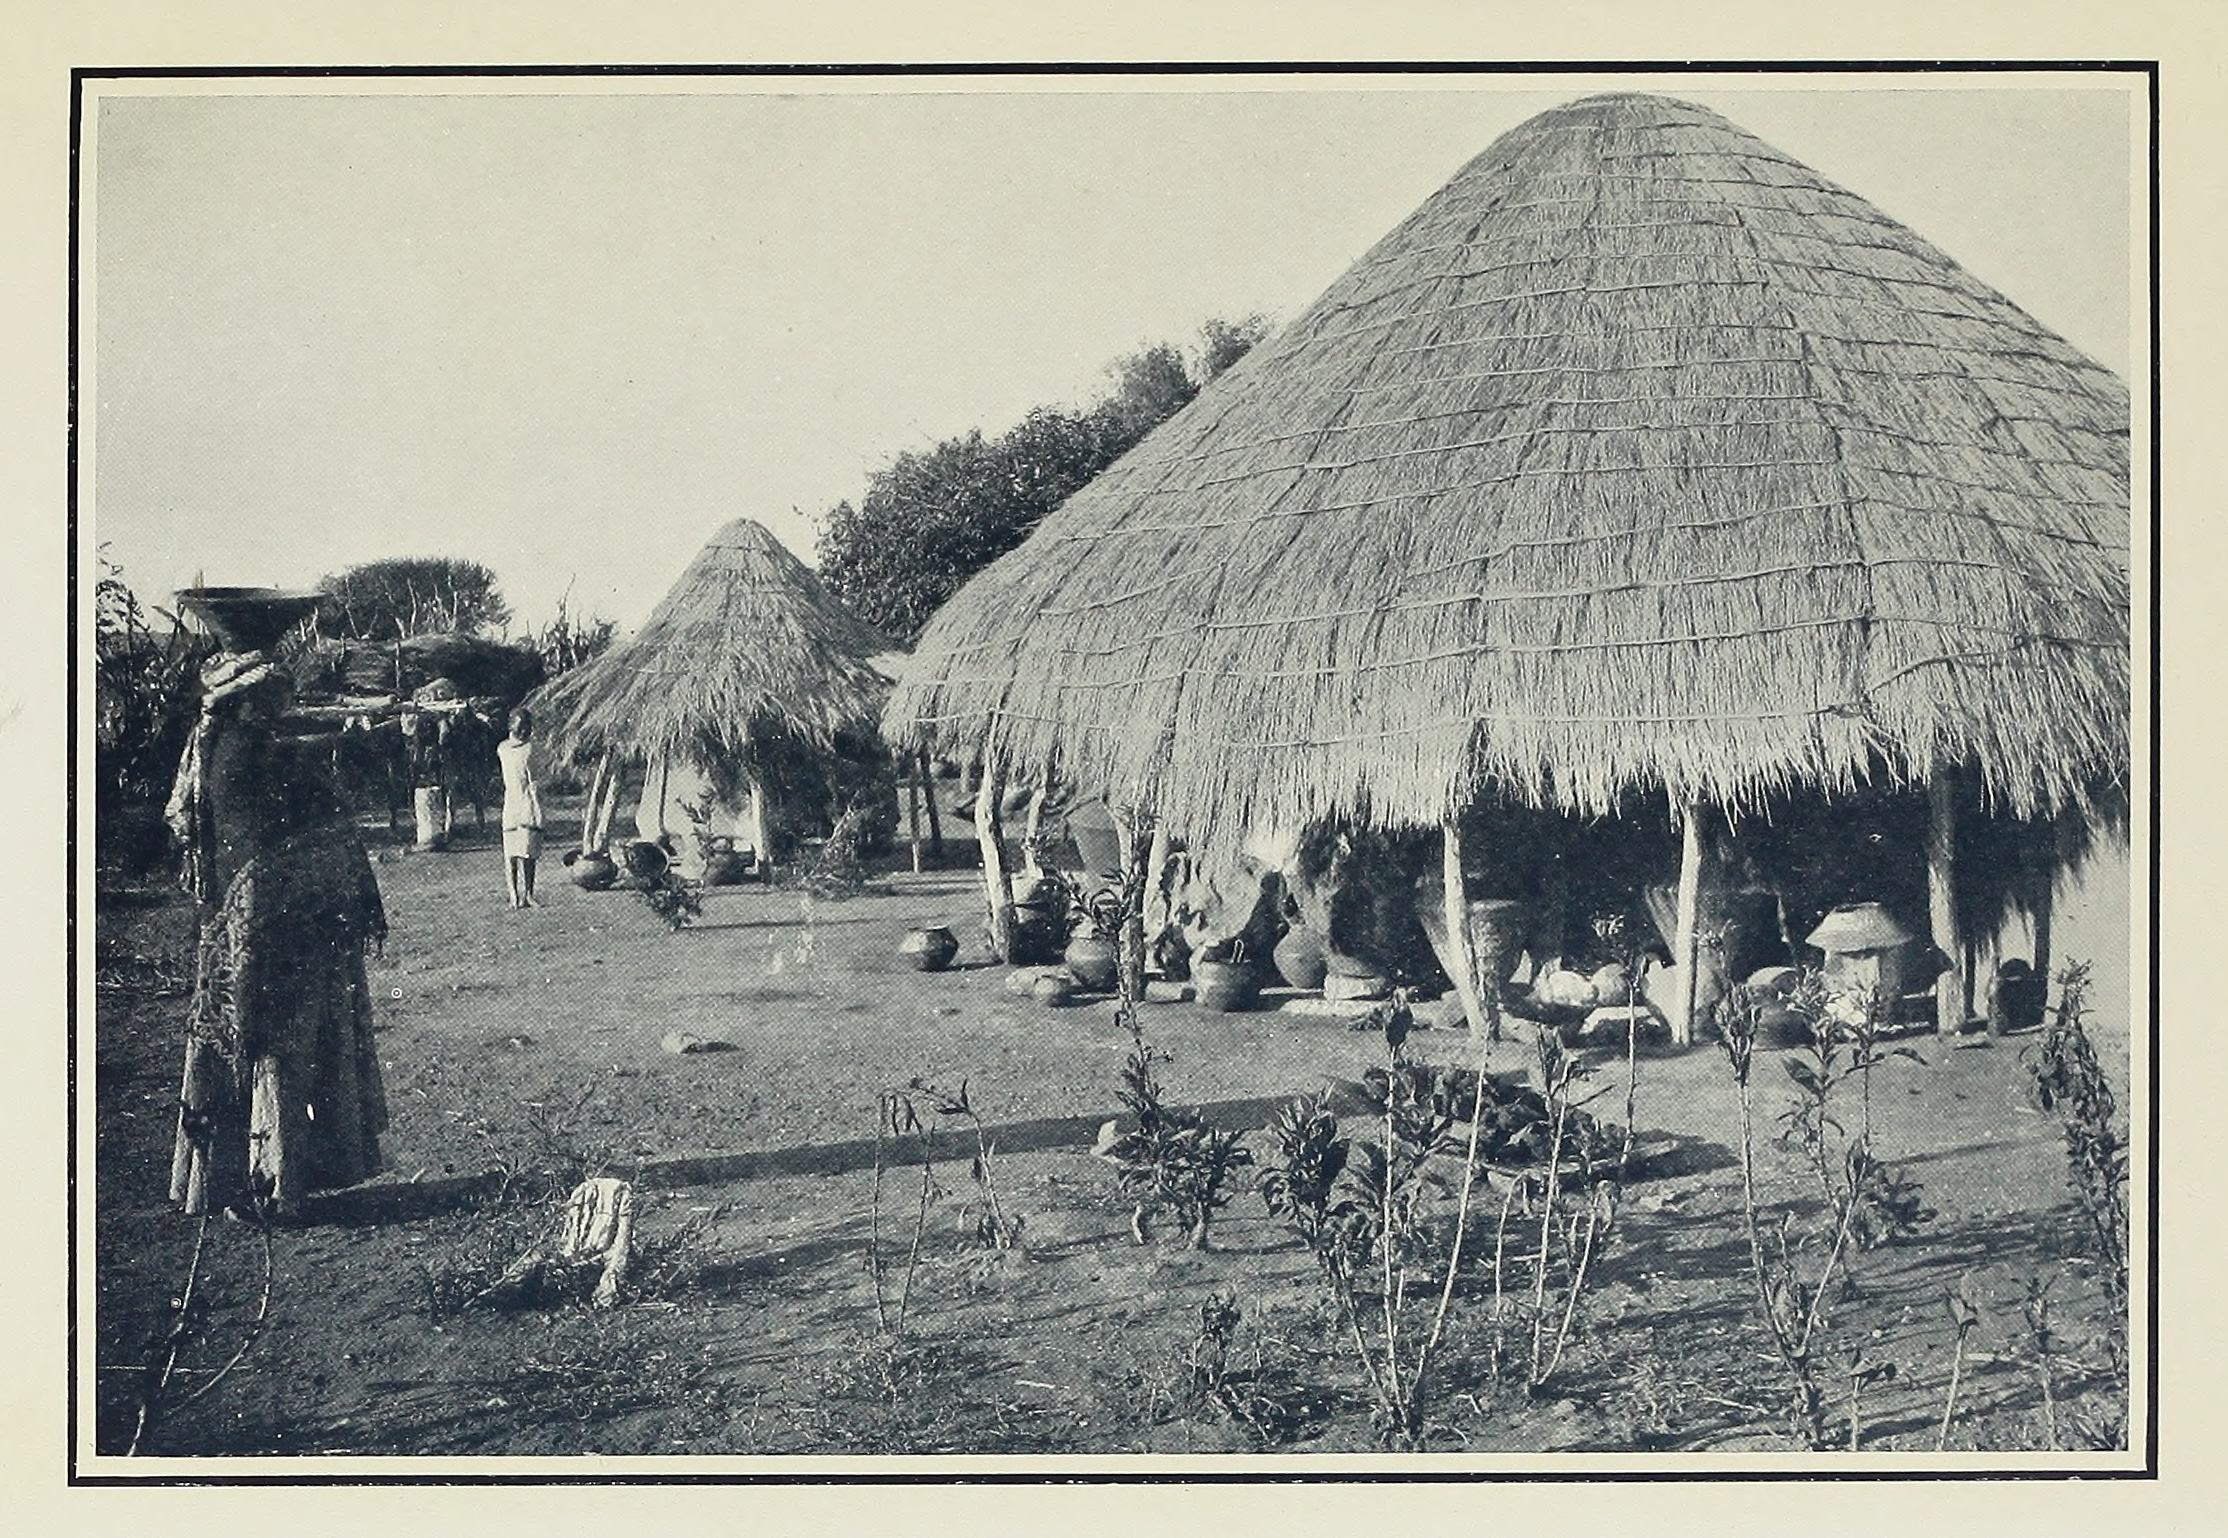 Scene in a Village of the Bechuana. Illustration from J. Tom Brown, Among the Bantu Nomads (London: Seely, Service & Co., 1926), opposite 48. Courtesy of the Internet Archive (https://archive.org/details/amongbantunomads00brow).